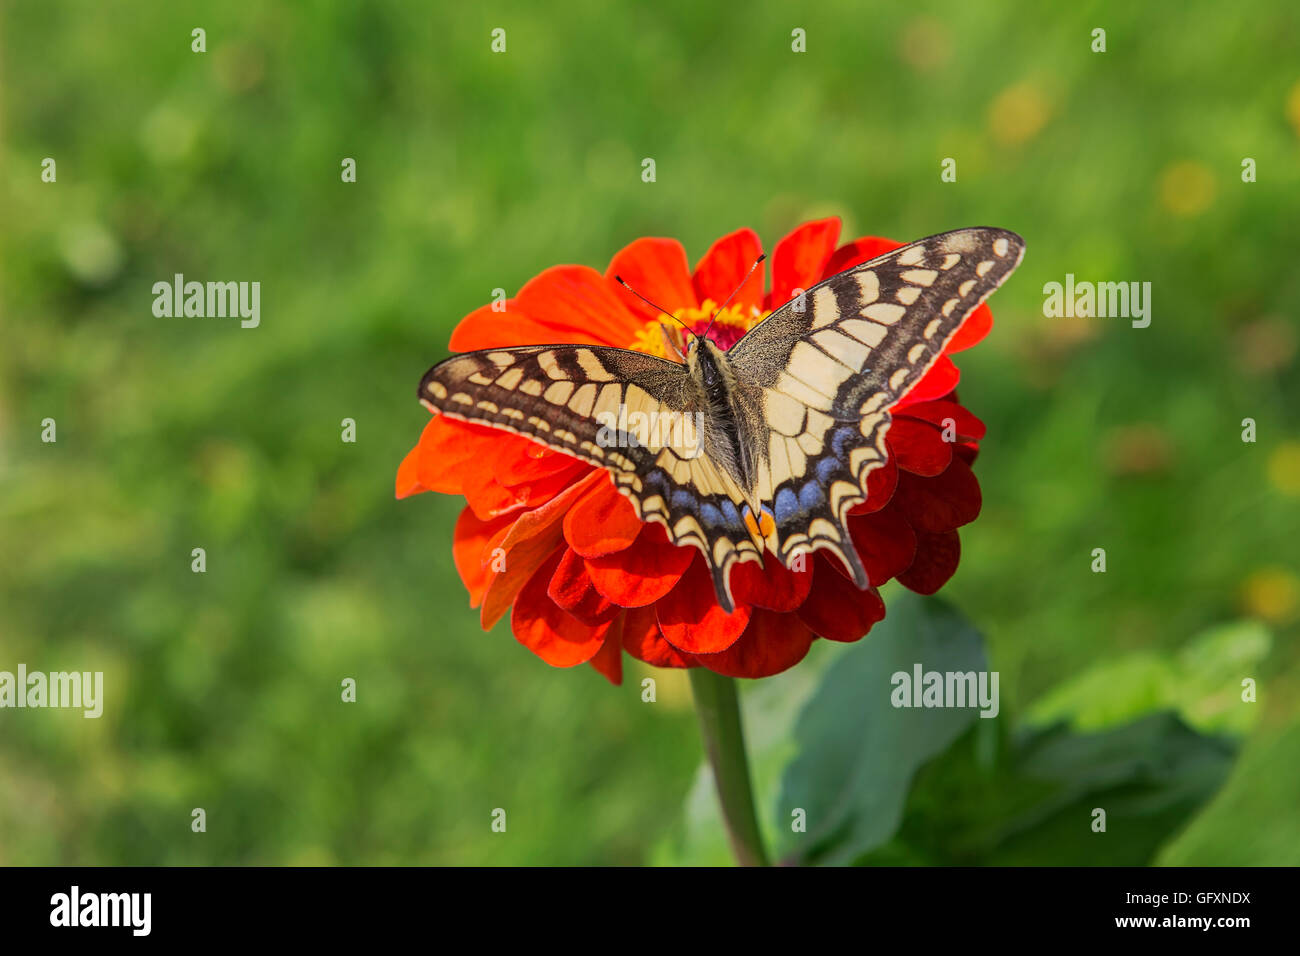 Swallowtail butterfly (Papilio machaon) a rare butterfly from the Papilionidae family on a red flower Stock Photo